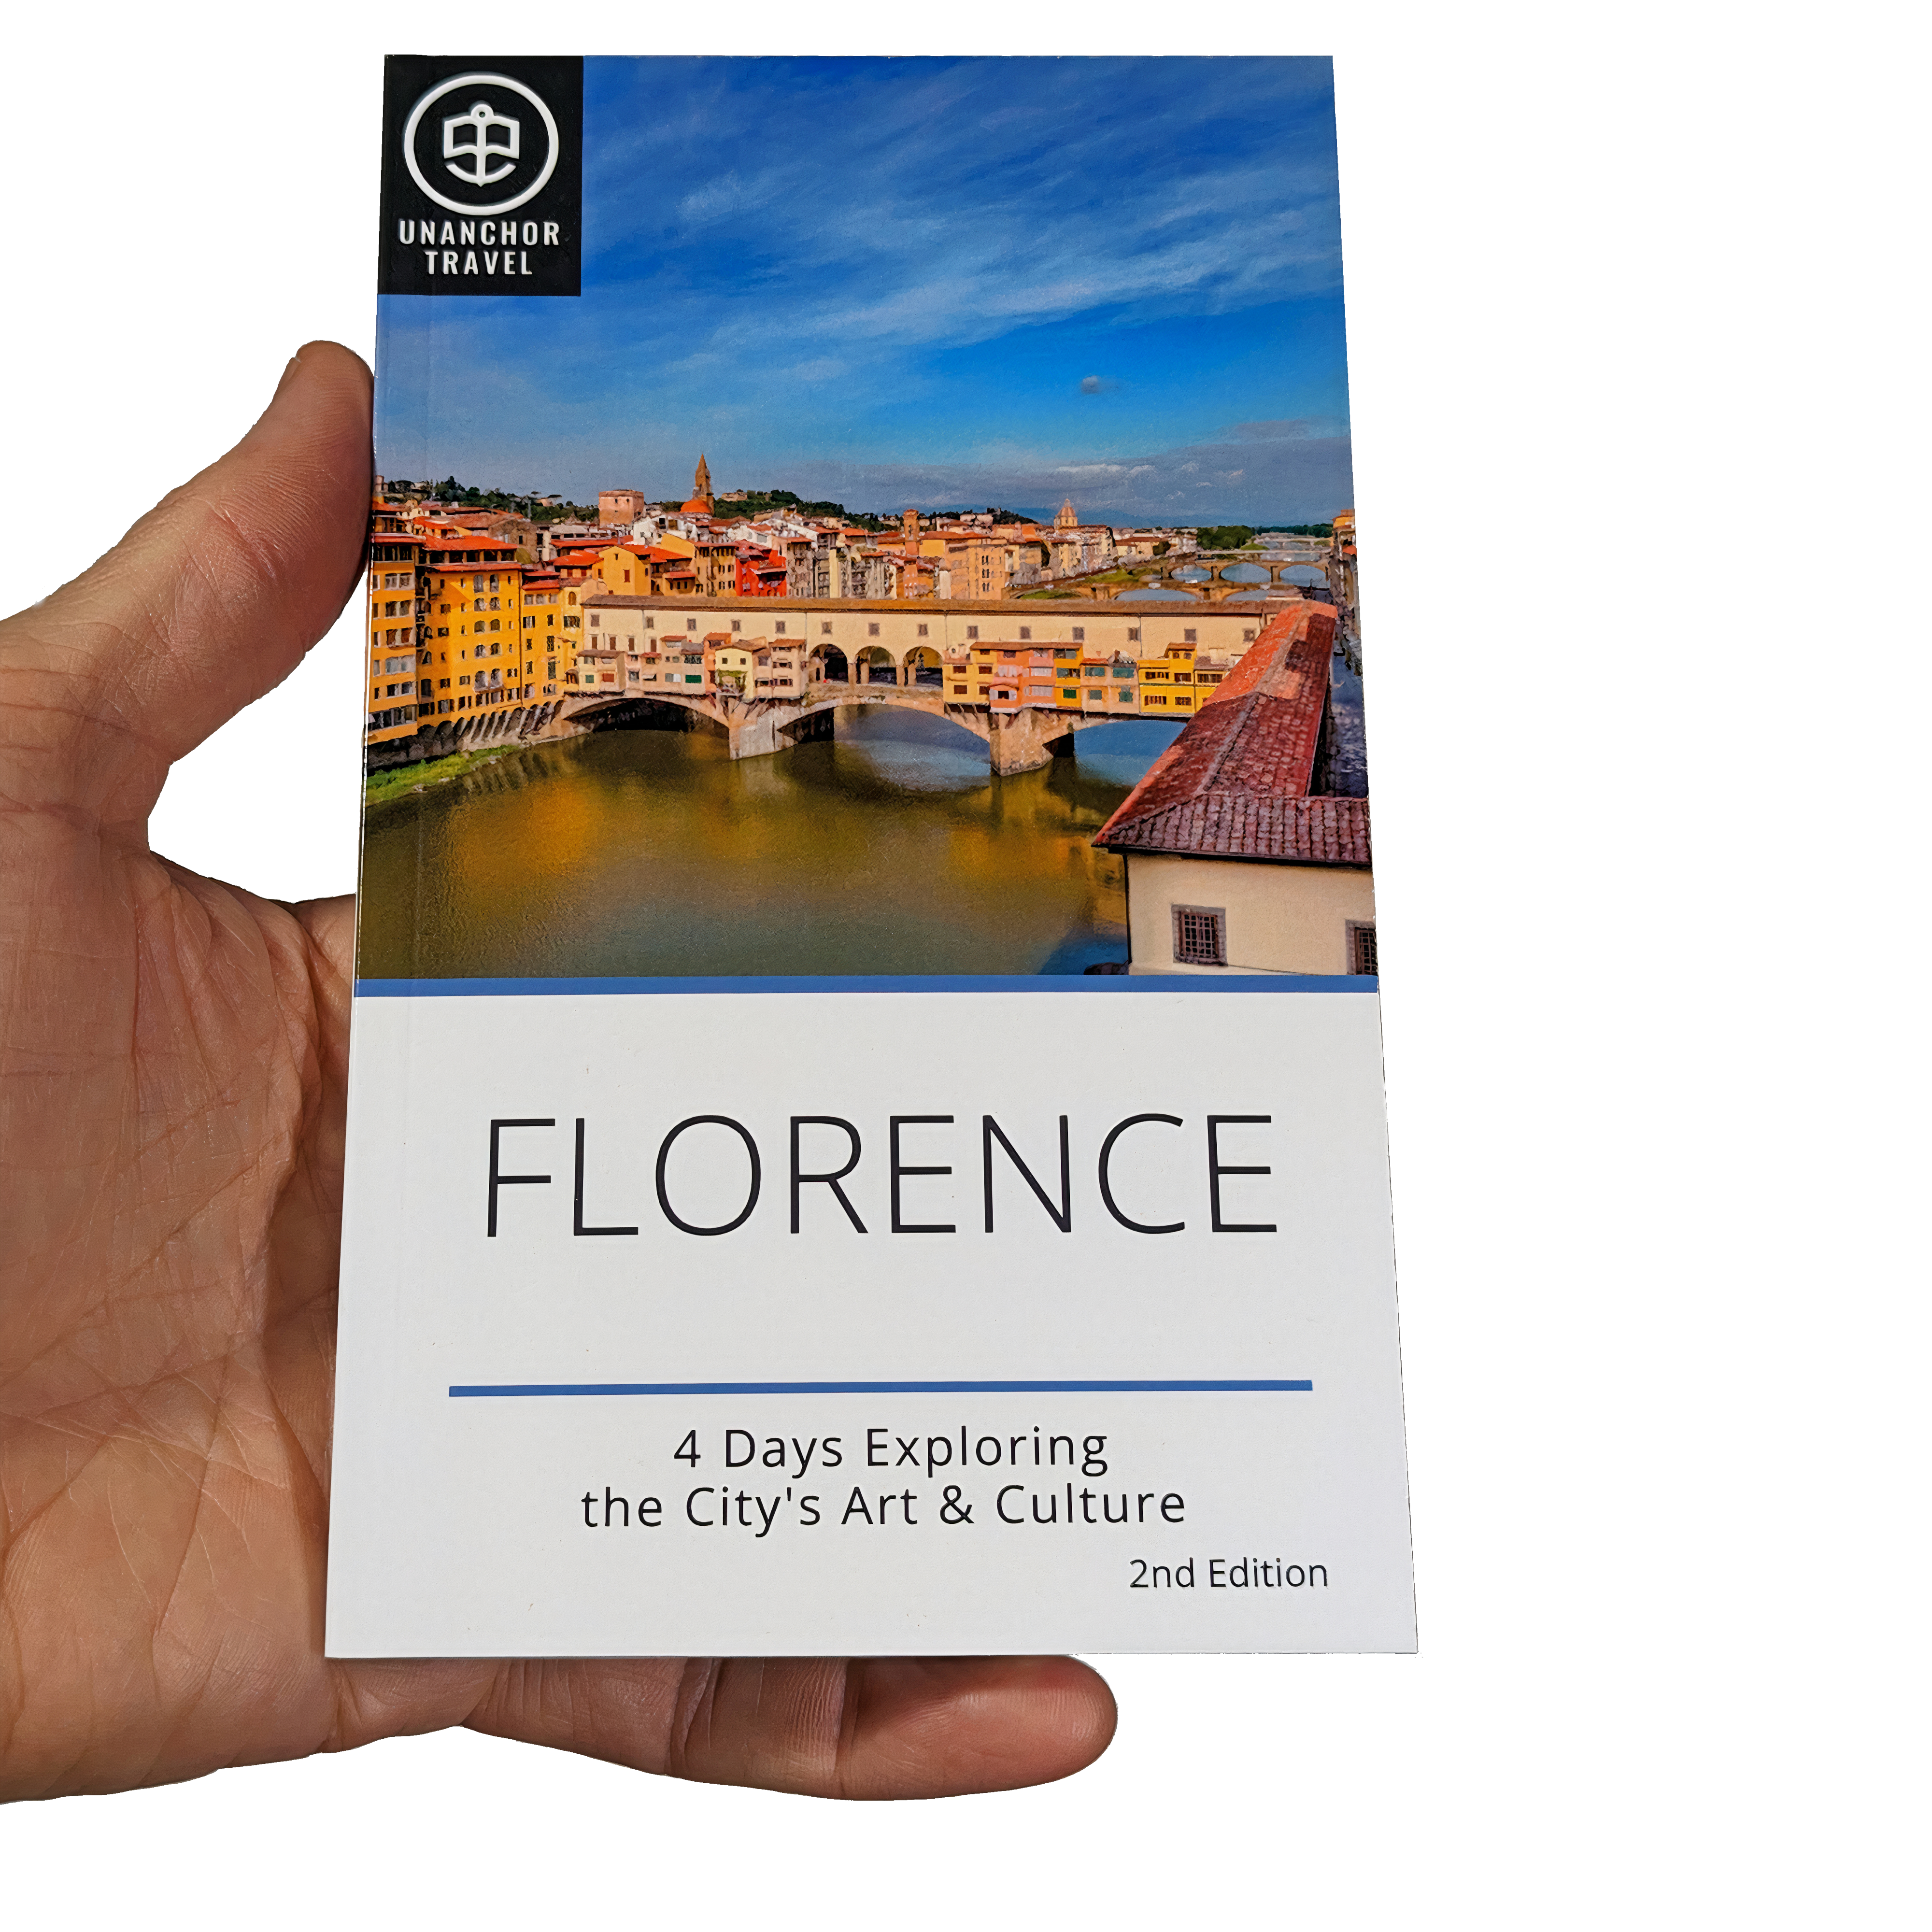 Florence, Italy: 4 Days Exploring the City's Art & Culture